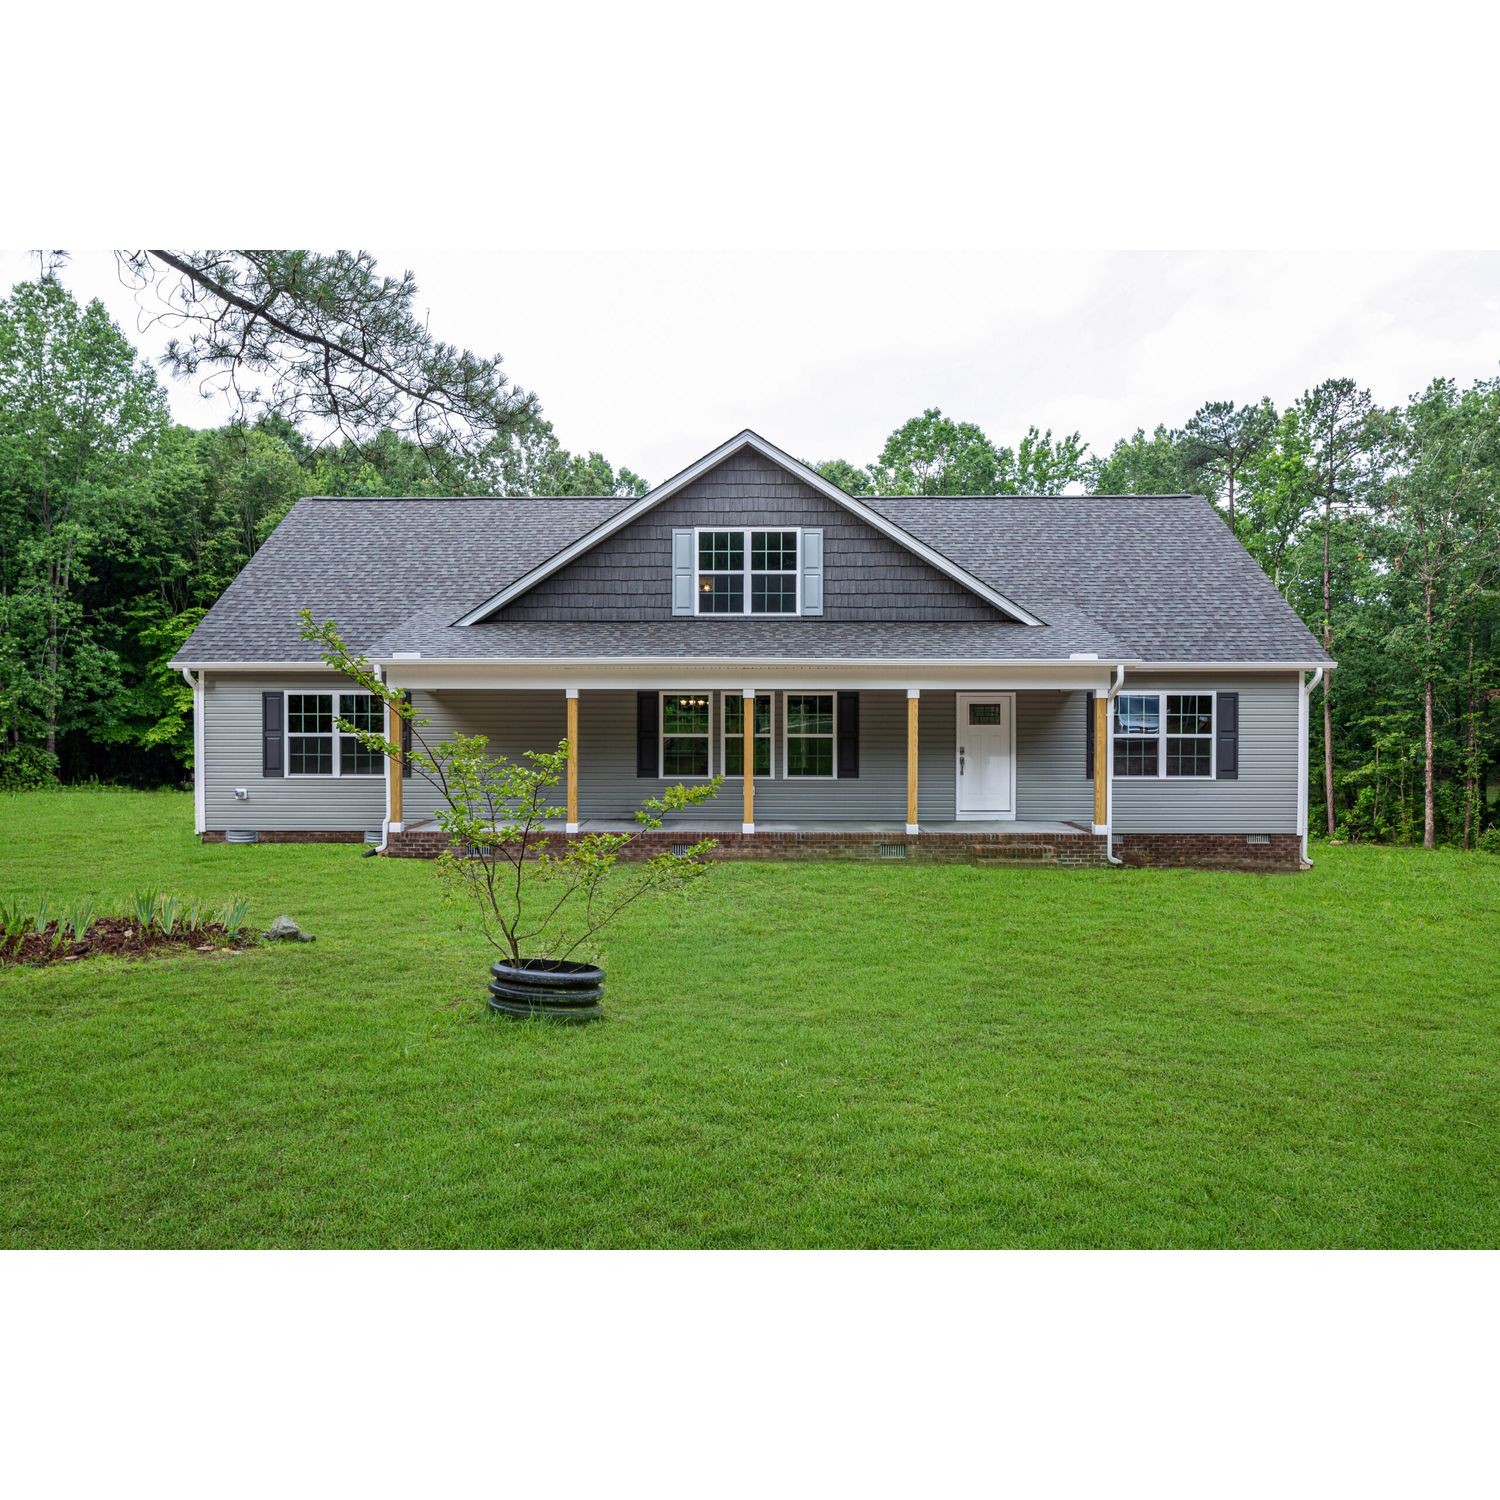 5. Valuebuild Homes - Rocky Mount - Build On Your Lot